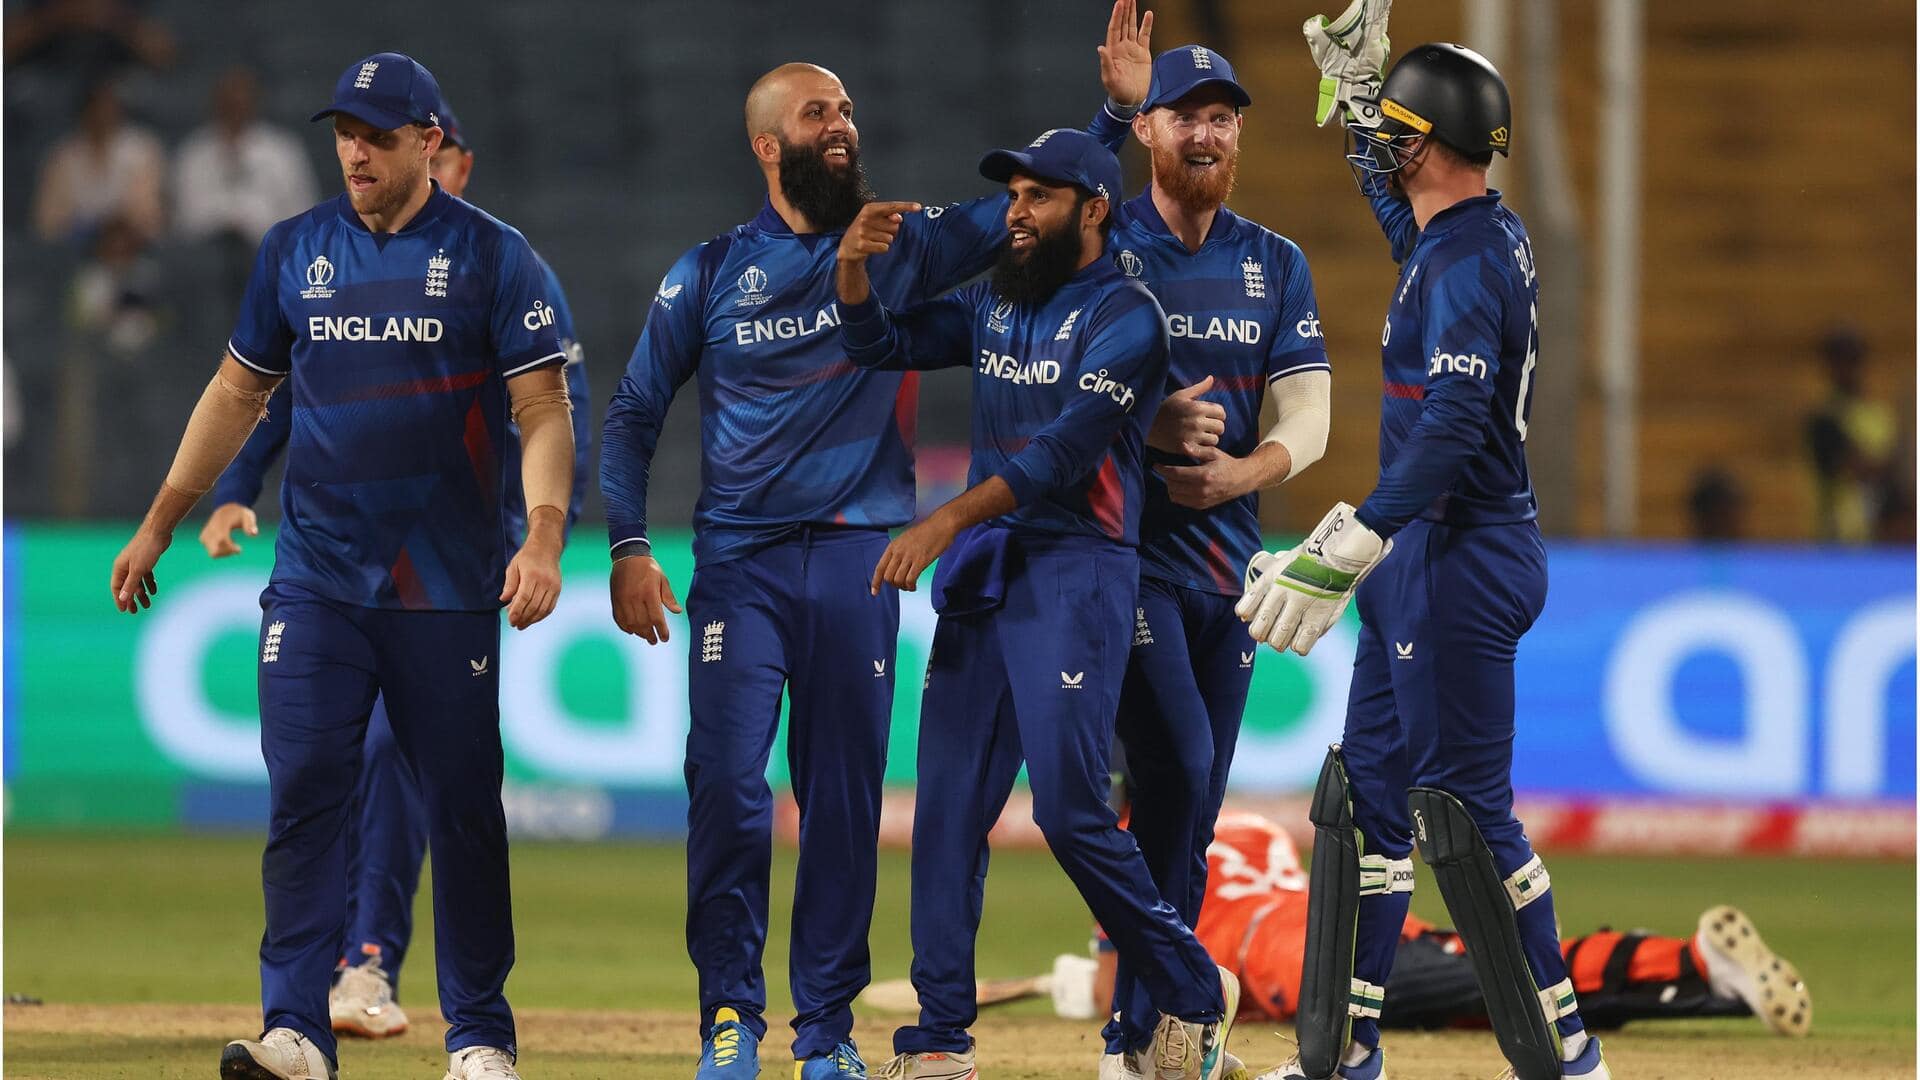 ICC World Cup, England vs Pakistan: Statistical preview